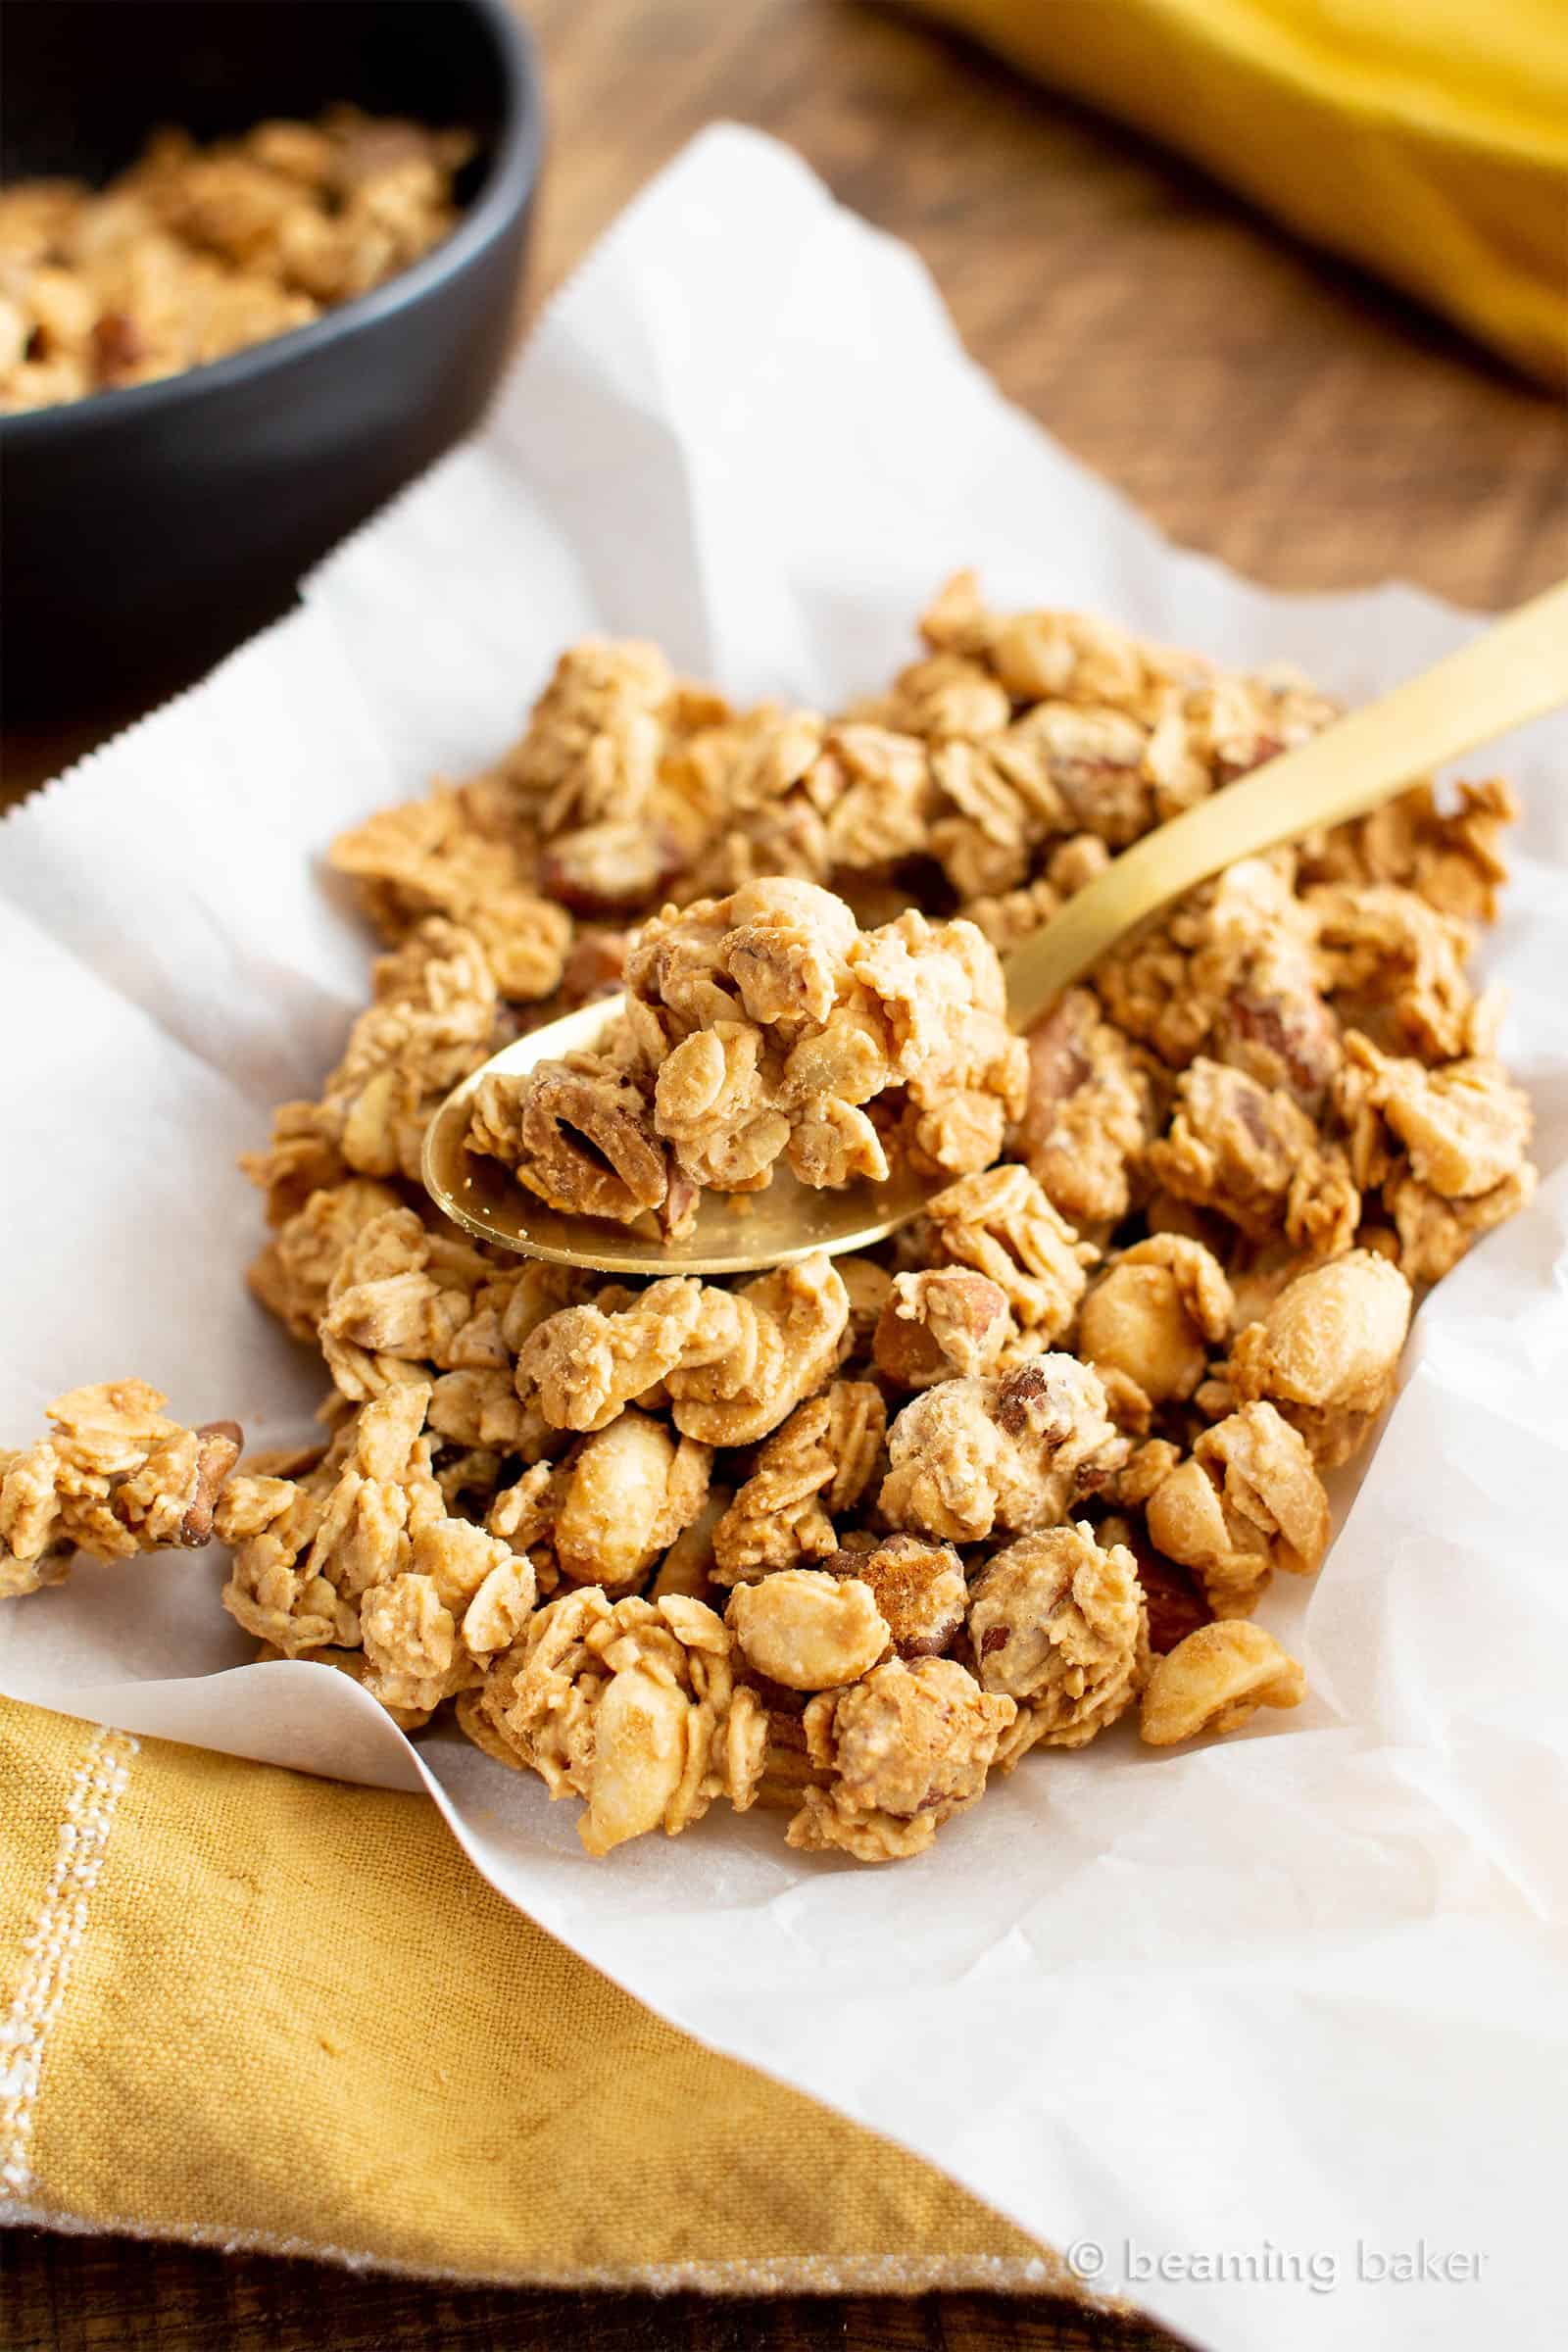 4 Ingredient Healthy Peanut Butter Granola Recipe (V, GF): this homemade peanut butter granola recipe is so easy & healthy! It’s crunchy with big clusters, salty, sweet and vegan, gluten-free, protein-rich! #Vegan #GlutenFree #PeanutButter #Granola | Recipe at BeamingBaker.com